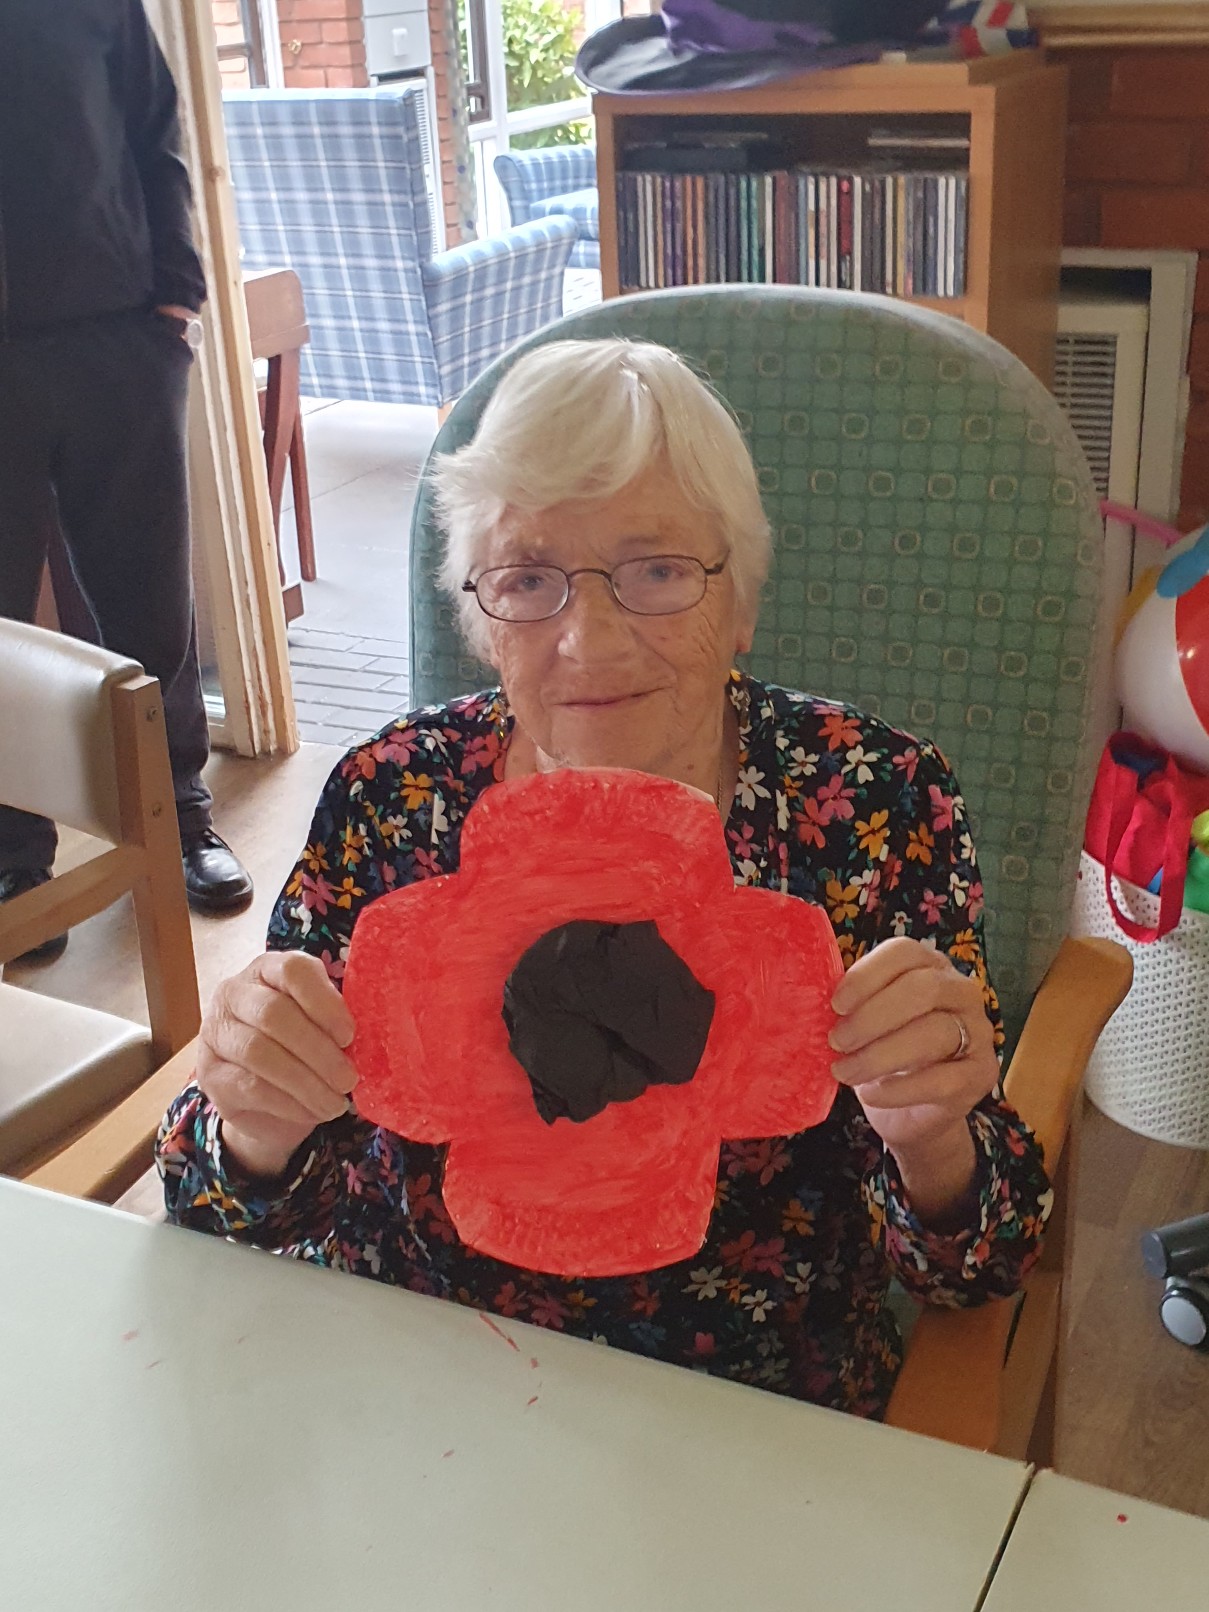 resident making a poppy out of paper plates